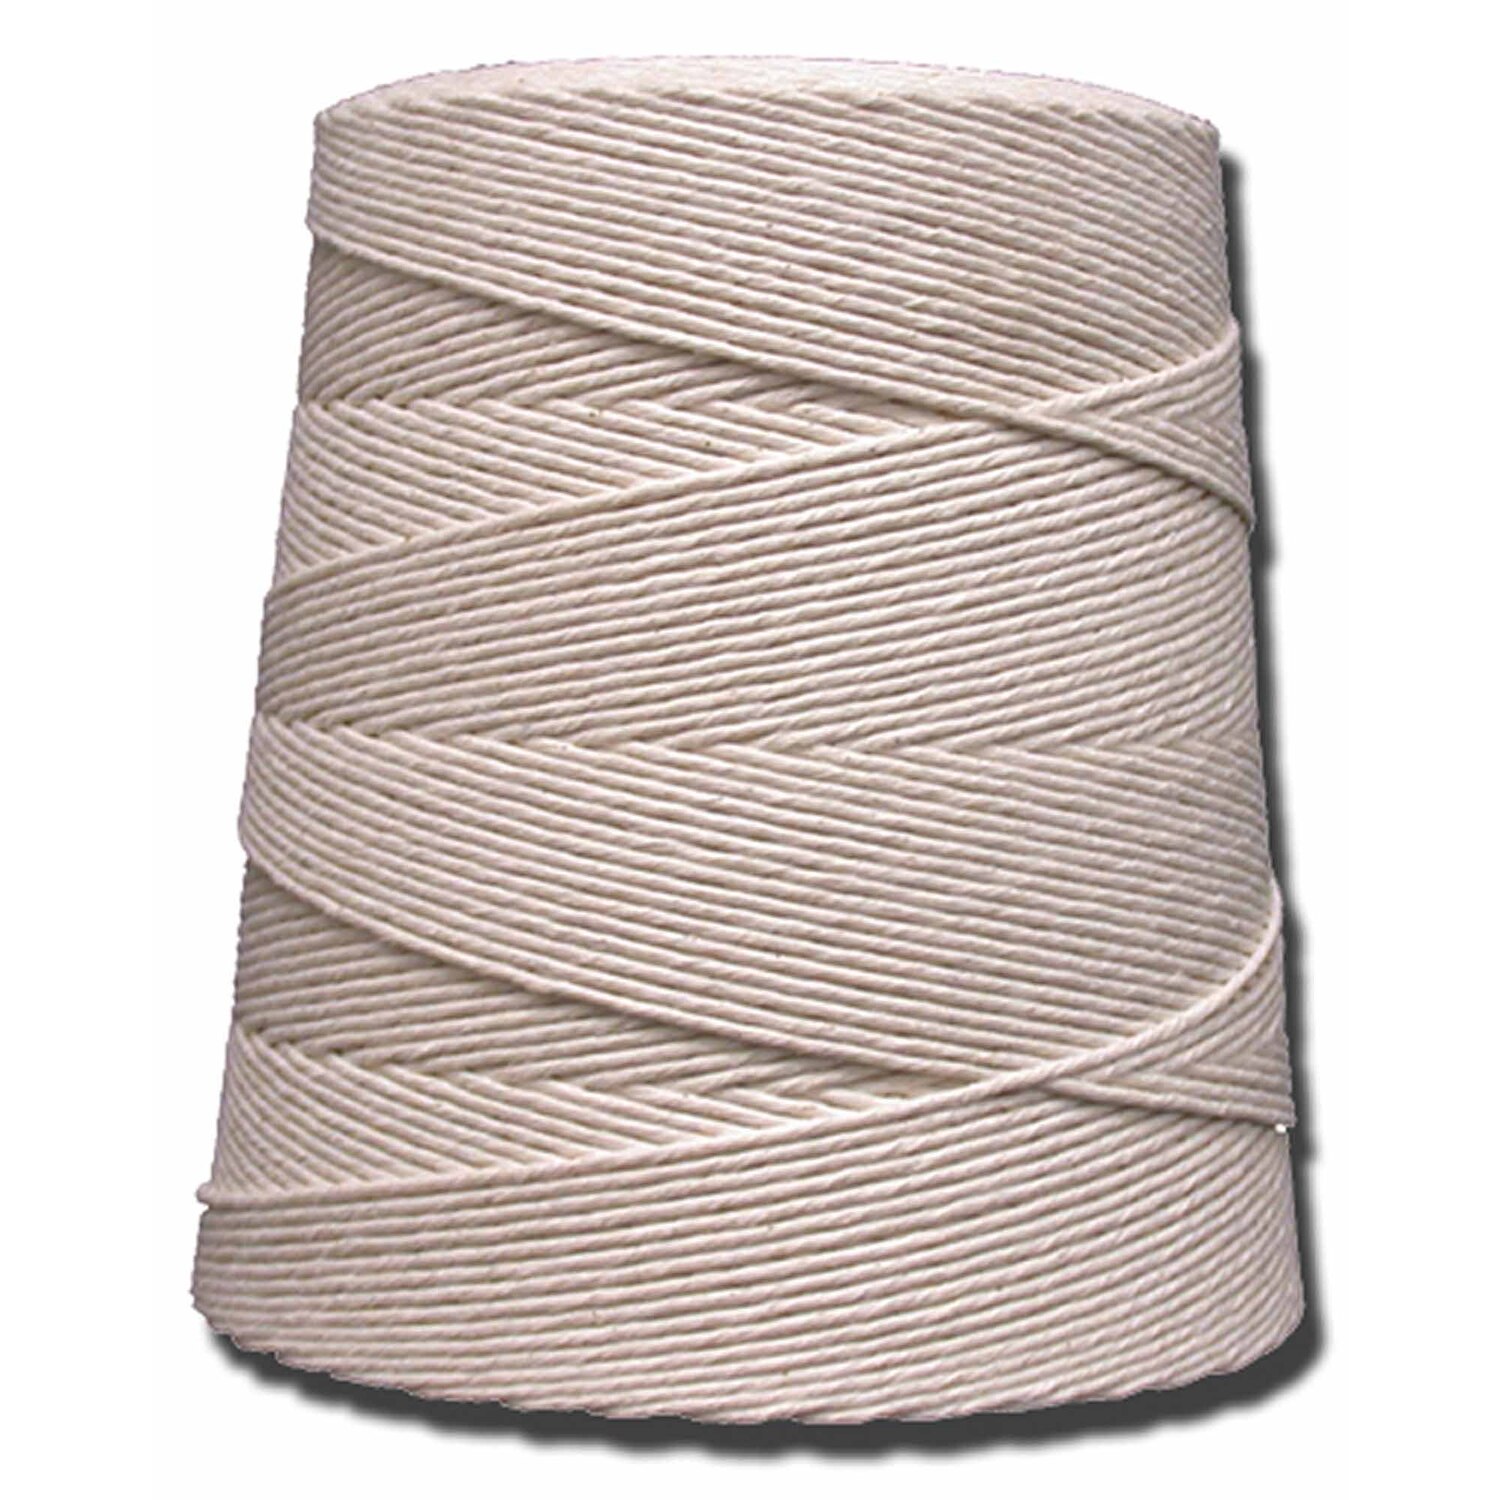 T.W. Evans Cordage  30 Poly Cotton Twine with 2.5 Pound Cone with 1562 ft. - image 1 of 1